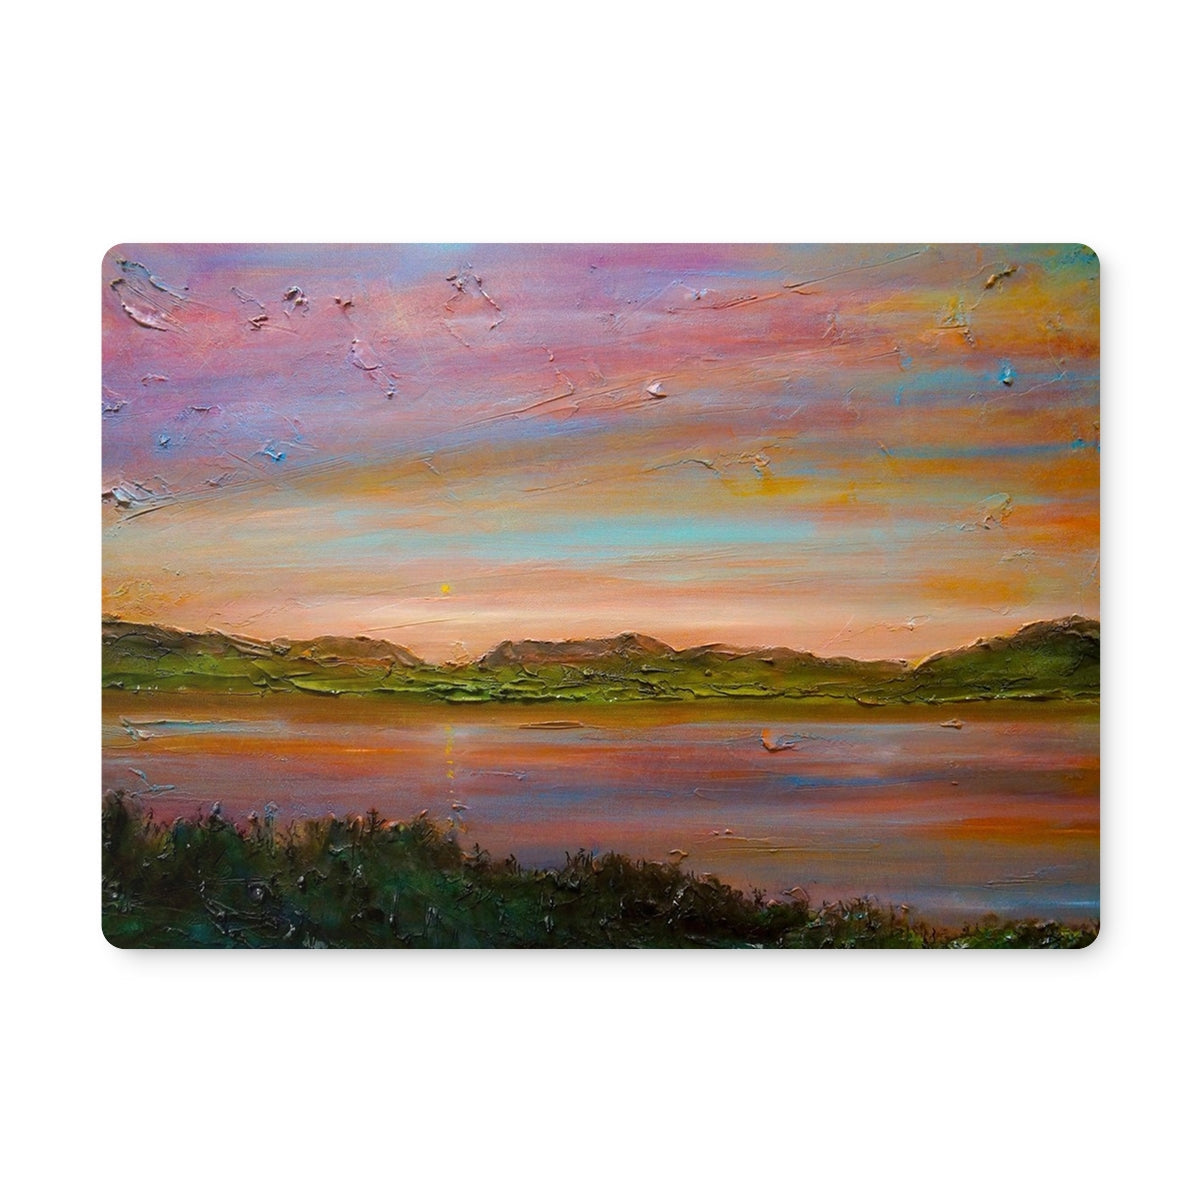 Gourock Golf Club Sunset Art Gifts Placemat-Placemats-River Clyde Art Gallery-Single Placemat-Paintings, Prints, Homeware, Art Gifts From Scotland By Scottish Artist Kevin Hunter